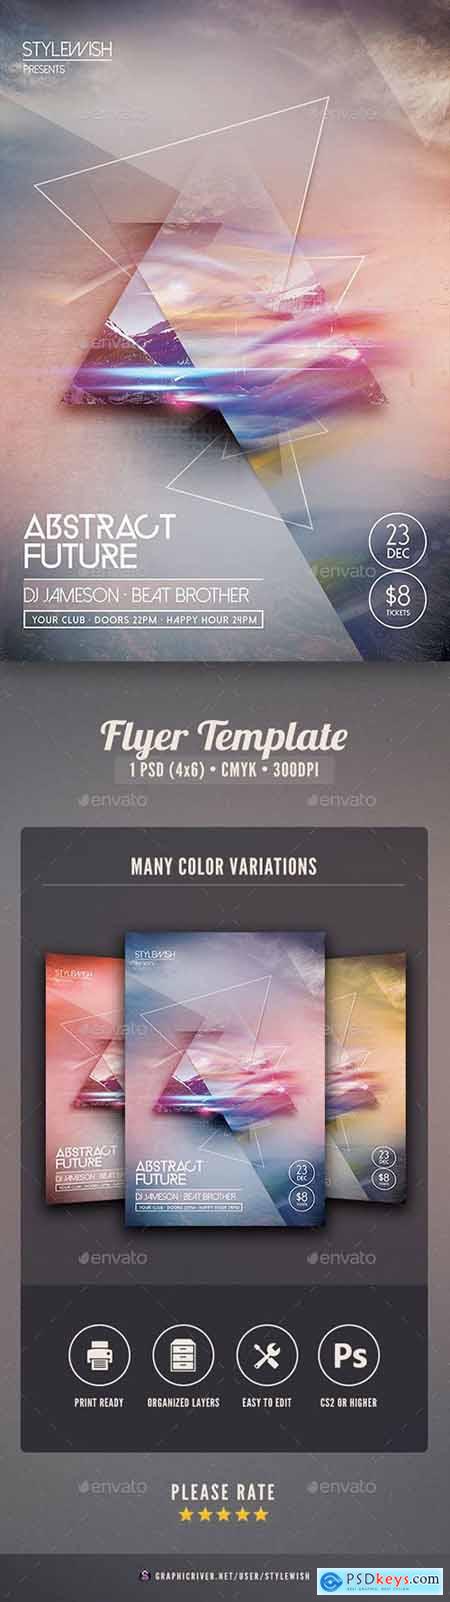 Graphicriver Abstract Future Flyer